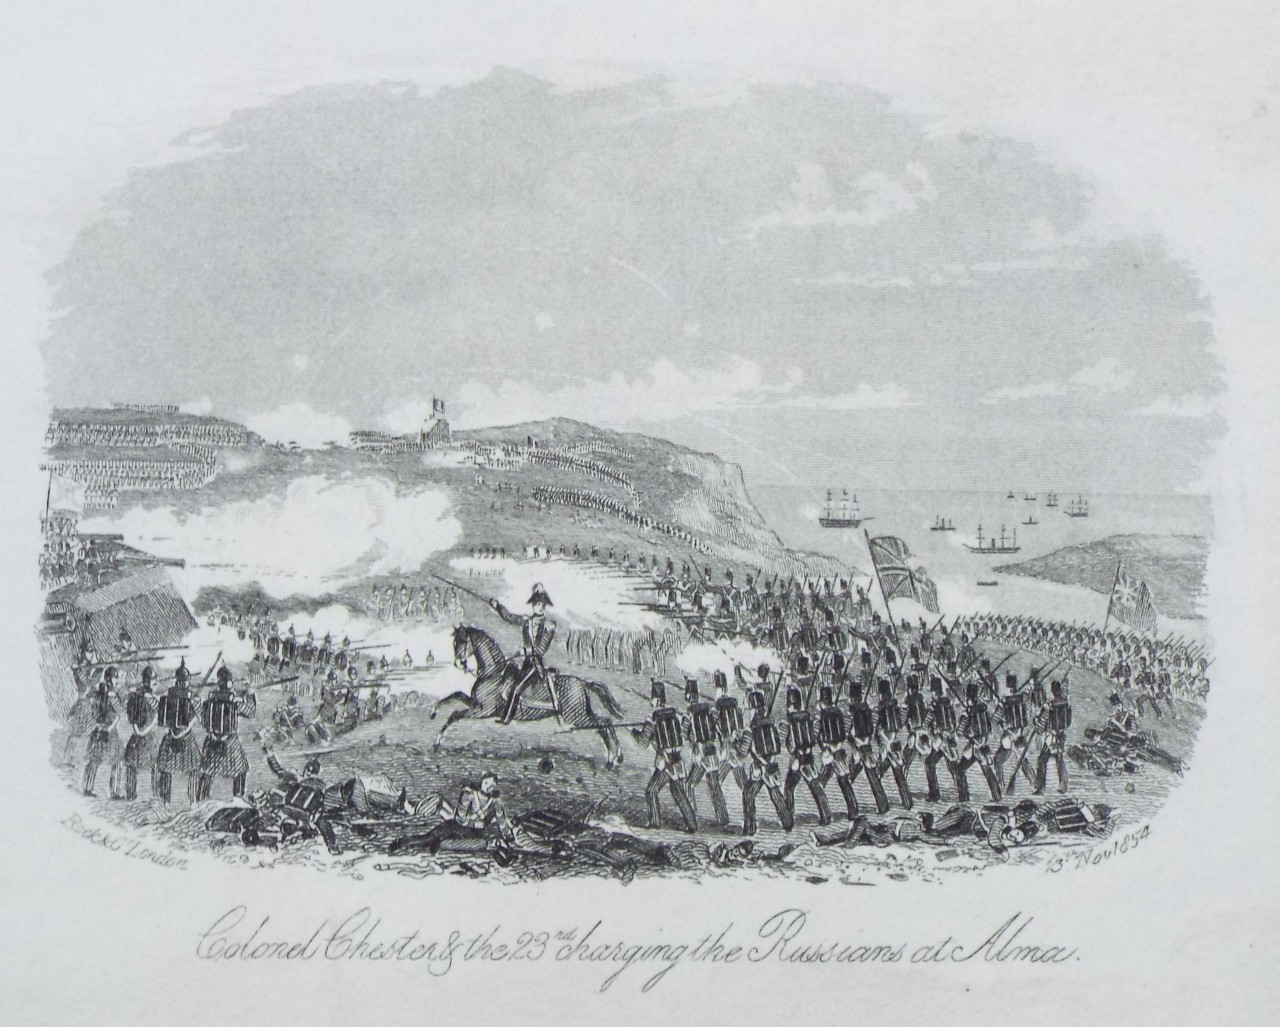 Steel Vignette - Colonel Chester & the 23rd charging the Russians at Alma. - Rock